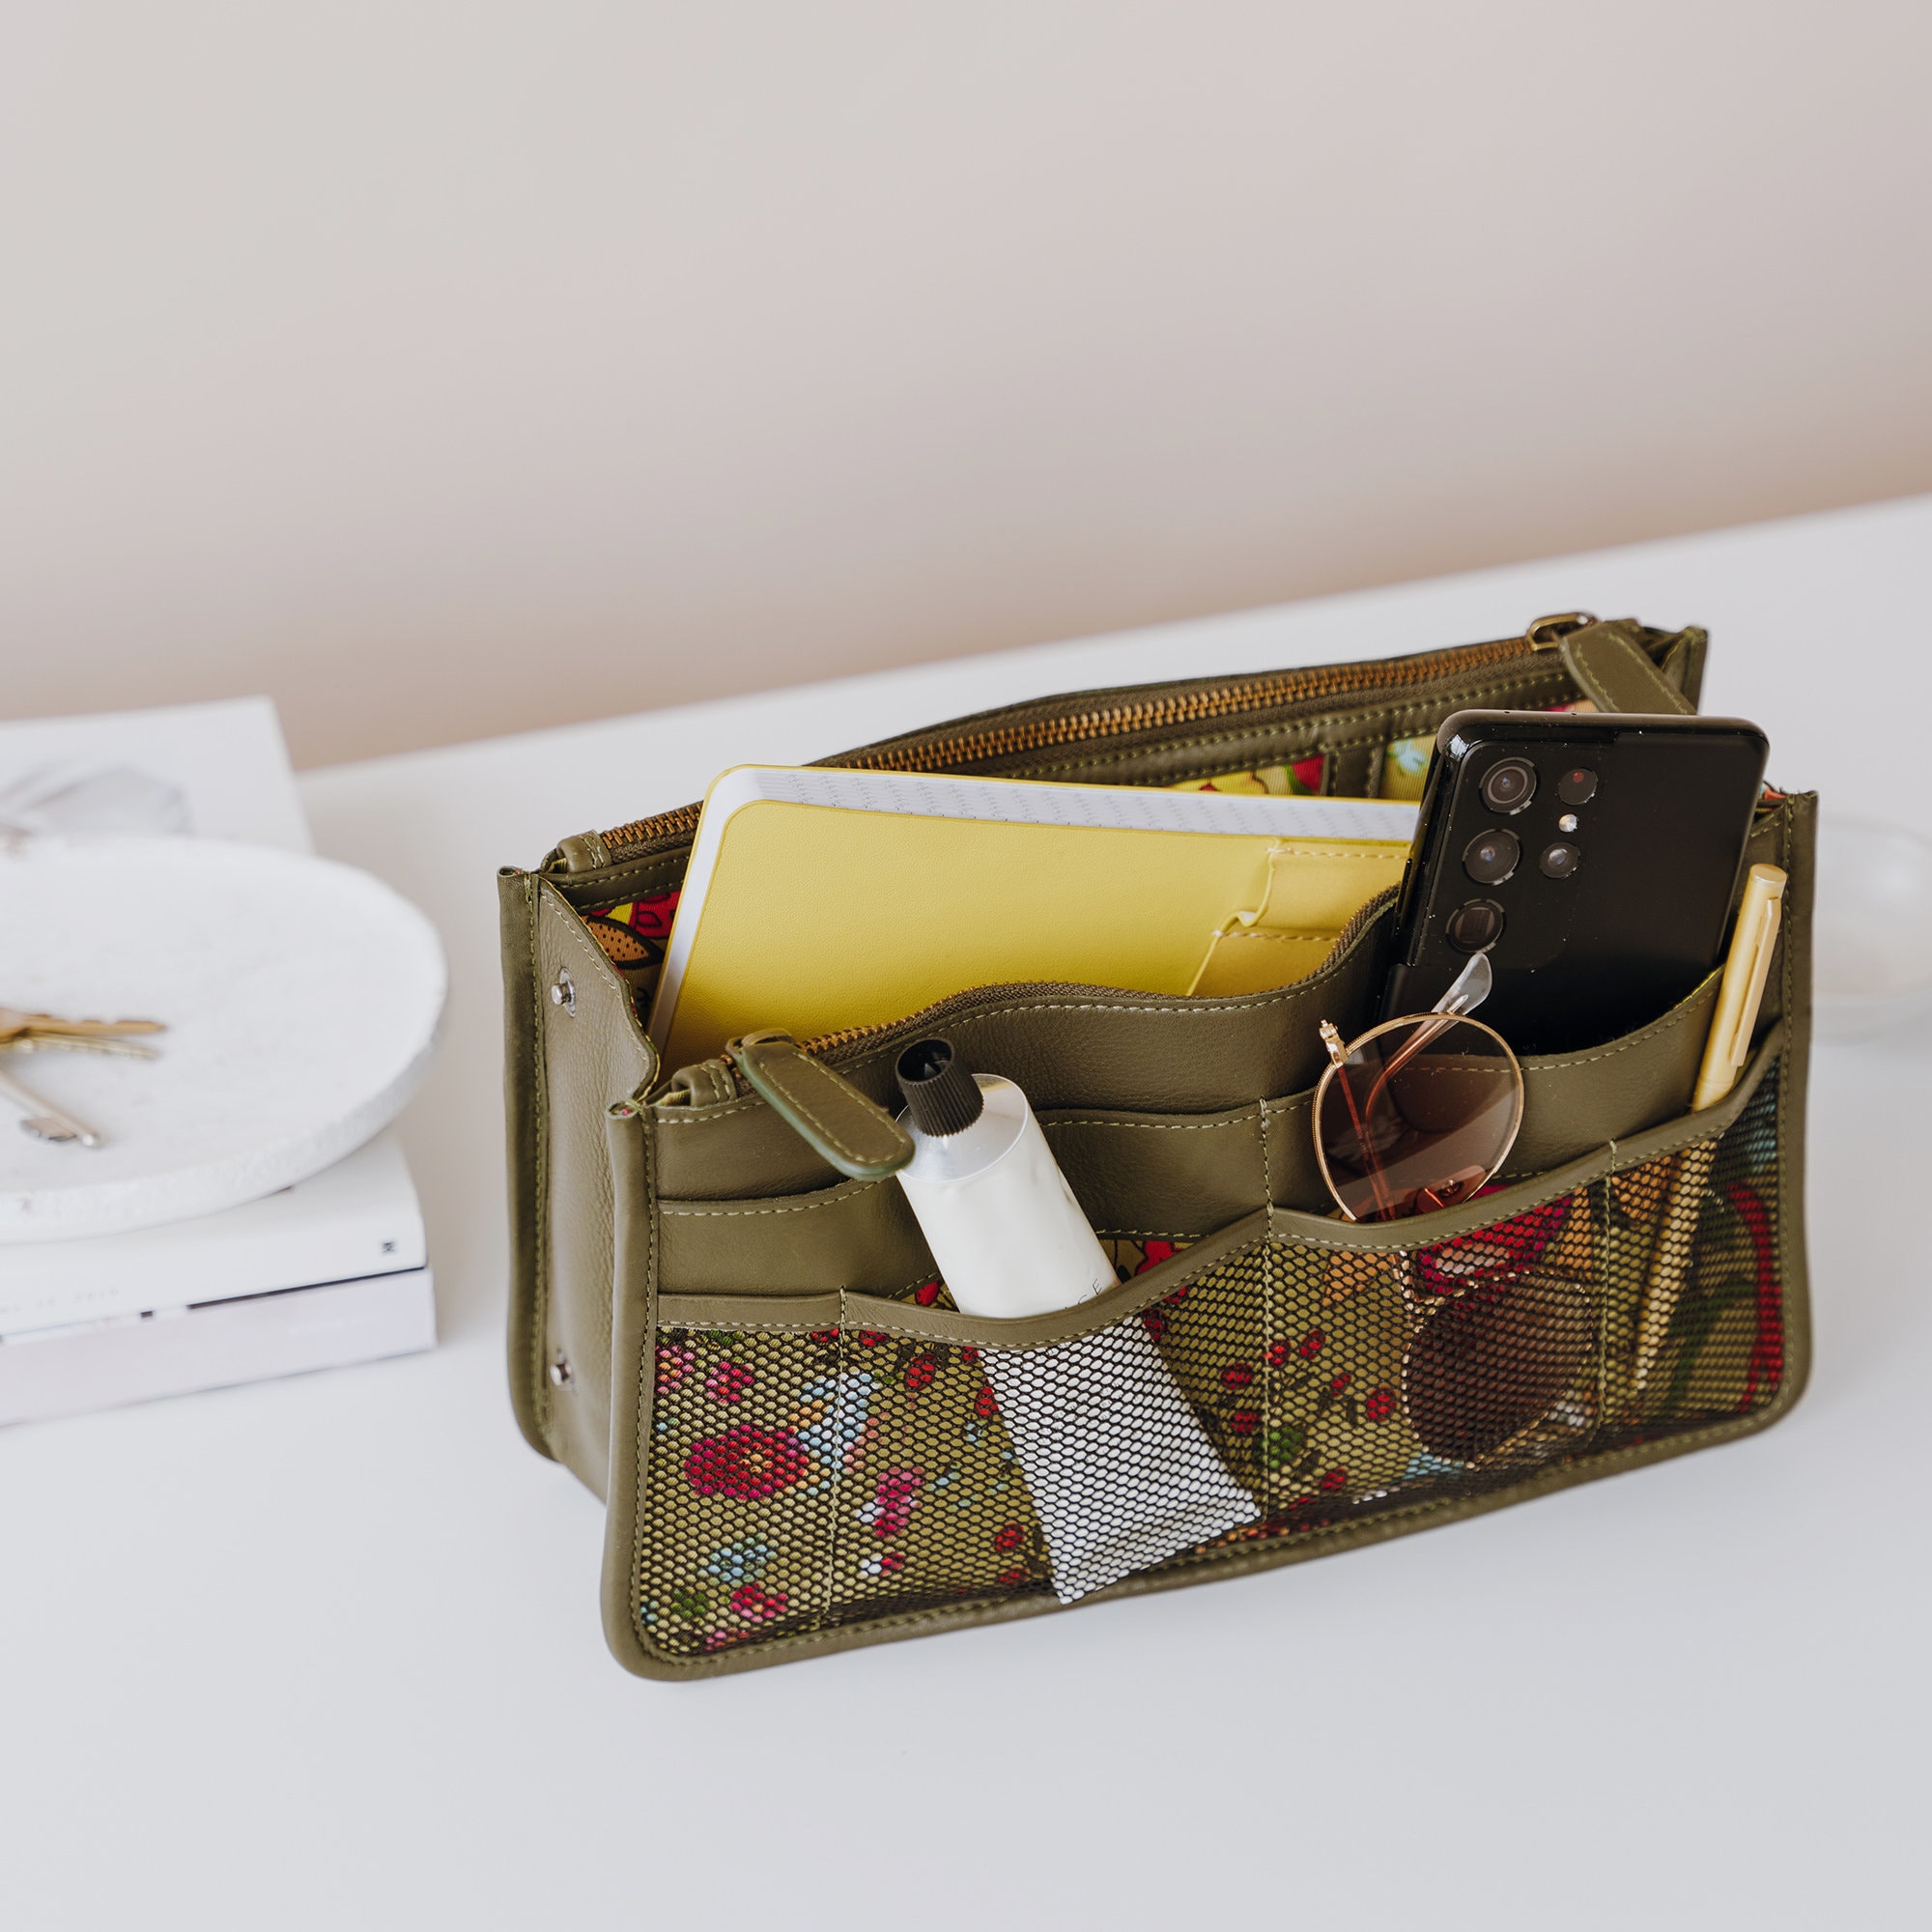 This handbag liner/organiser has been expertly designed by us to fit t